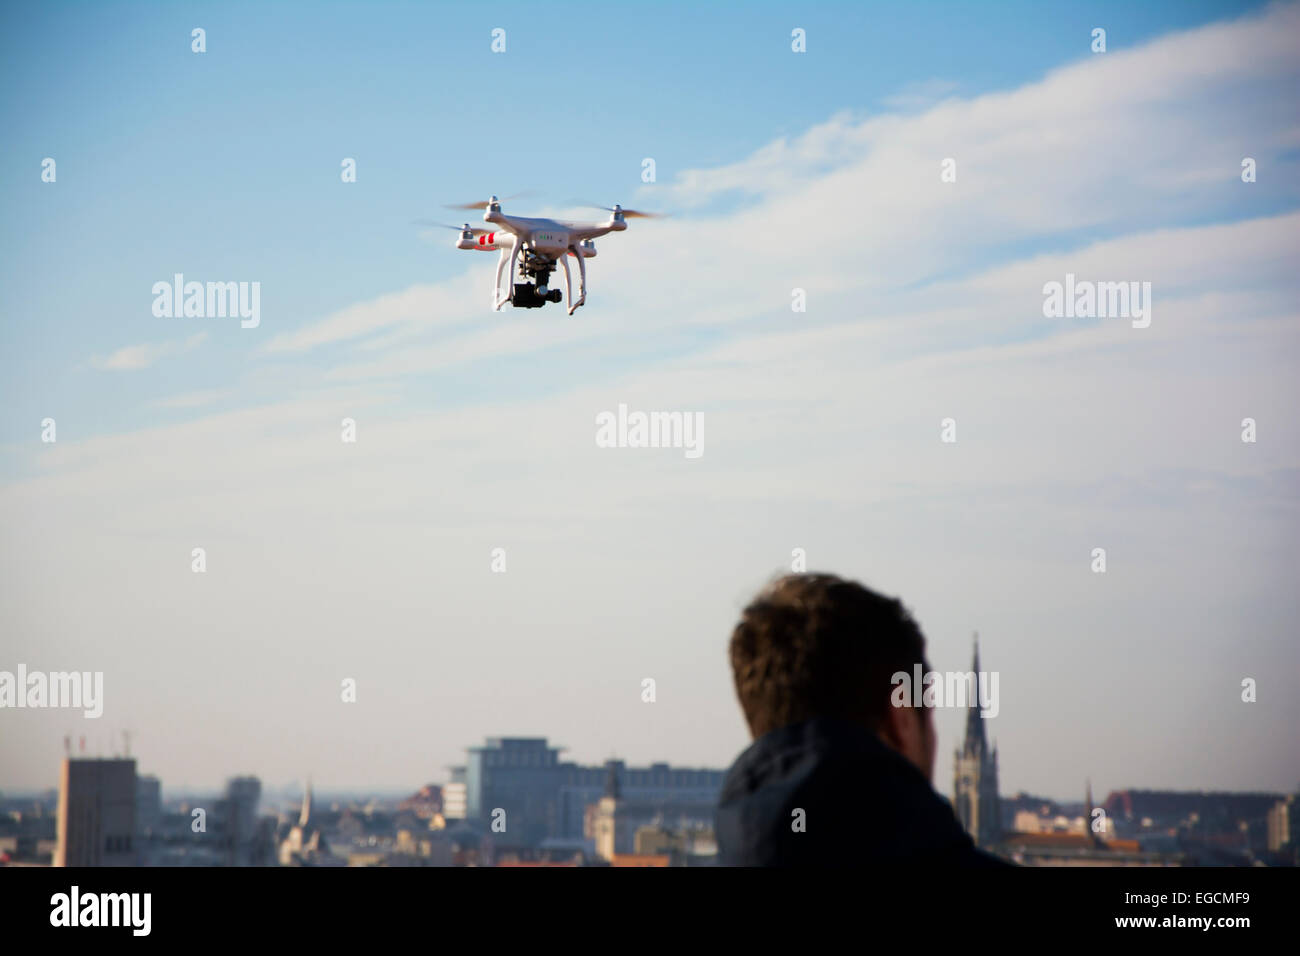 Drone controlled by a man flying over the city Stock Photo